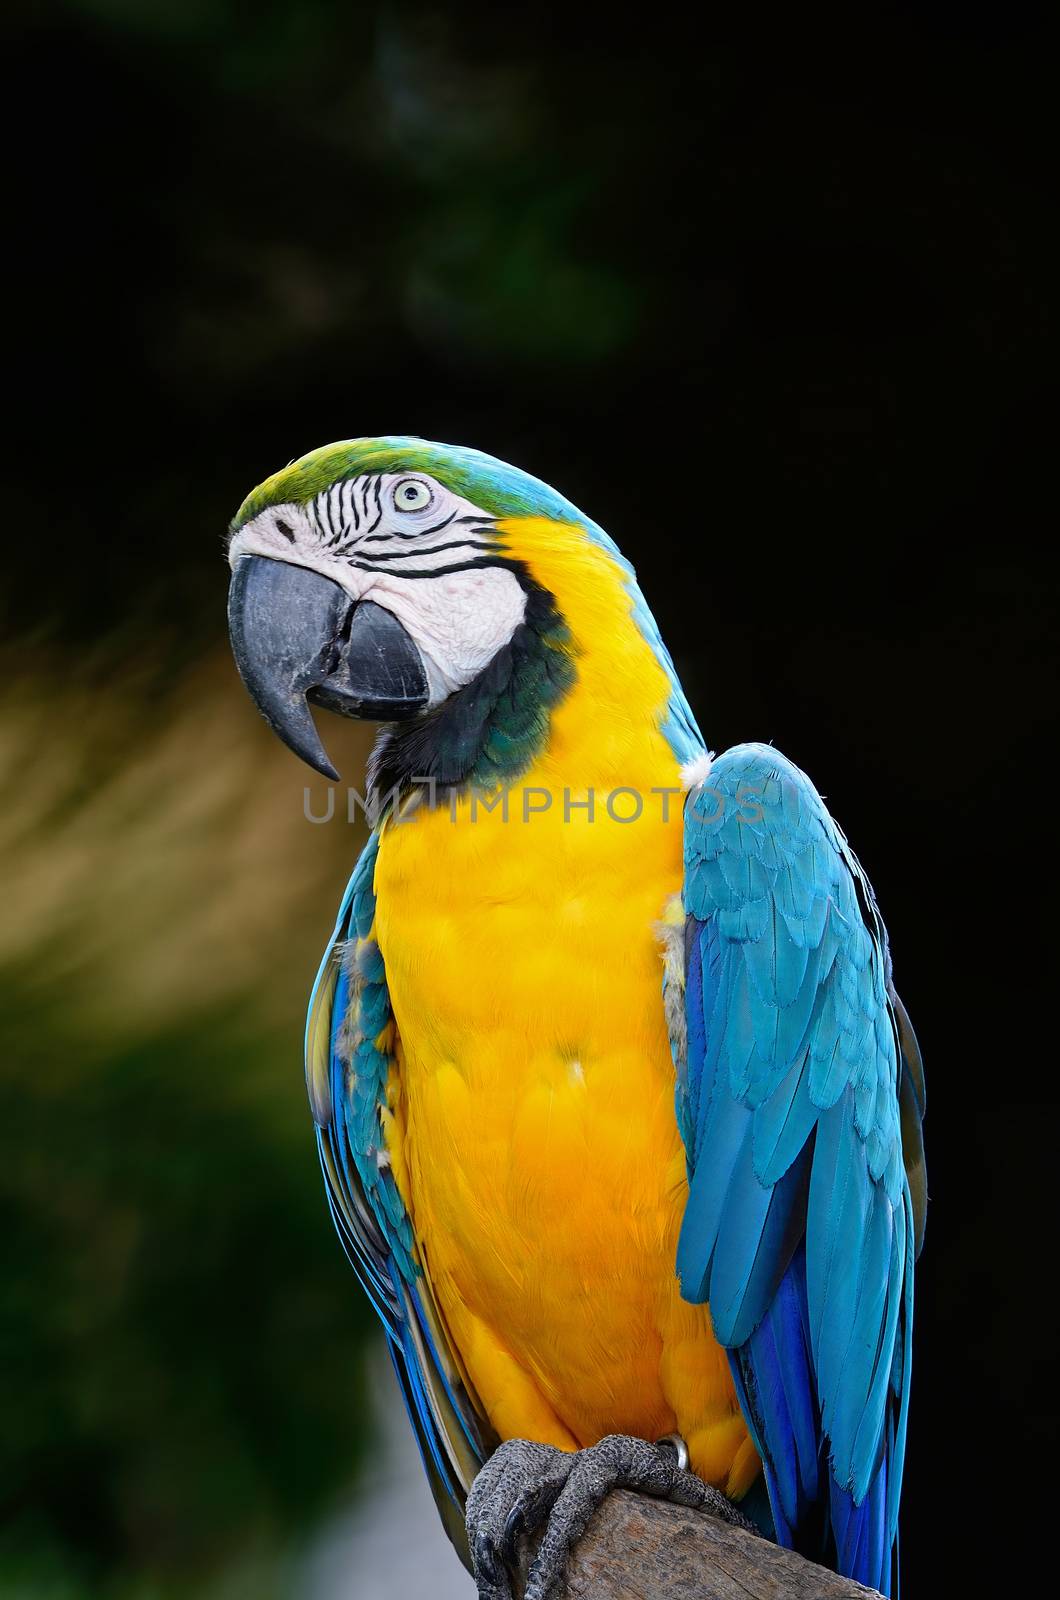 Colorful Blue and Gold Macaw aviary, breast profile